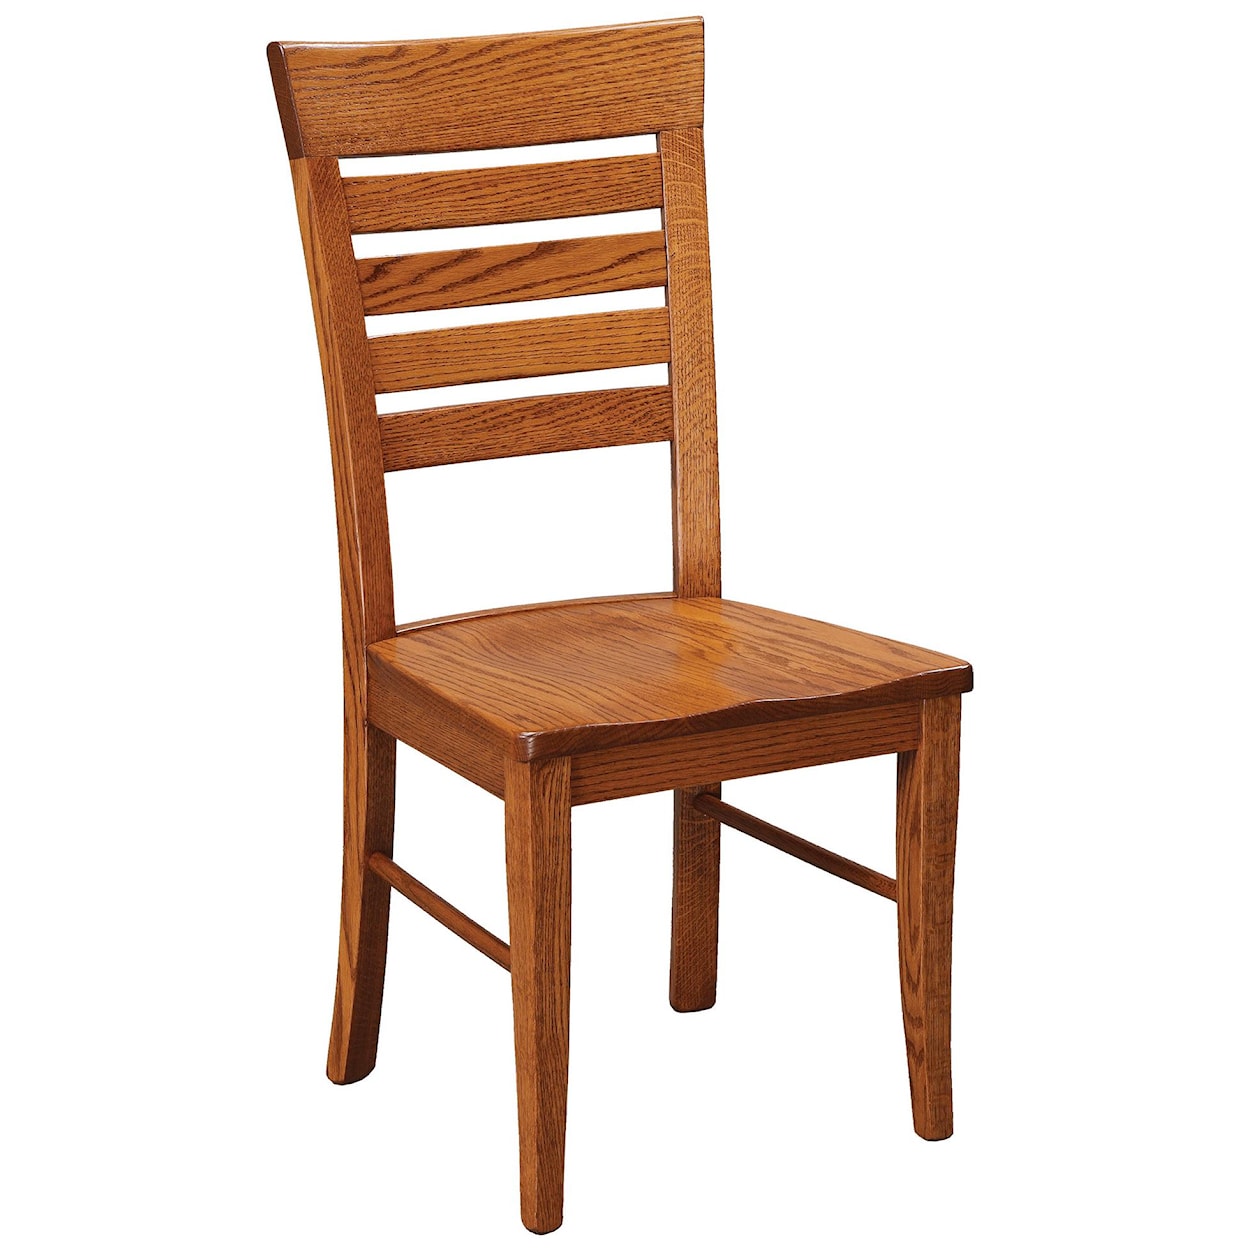 Daniel's Amish Chairs and Barstools Metro Ladder Side Chair